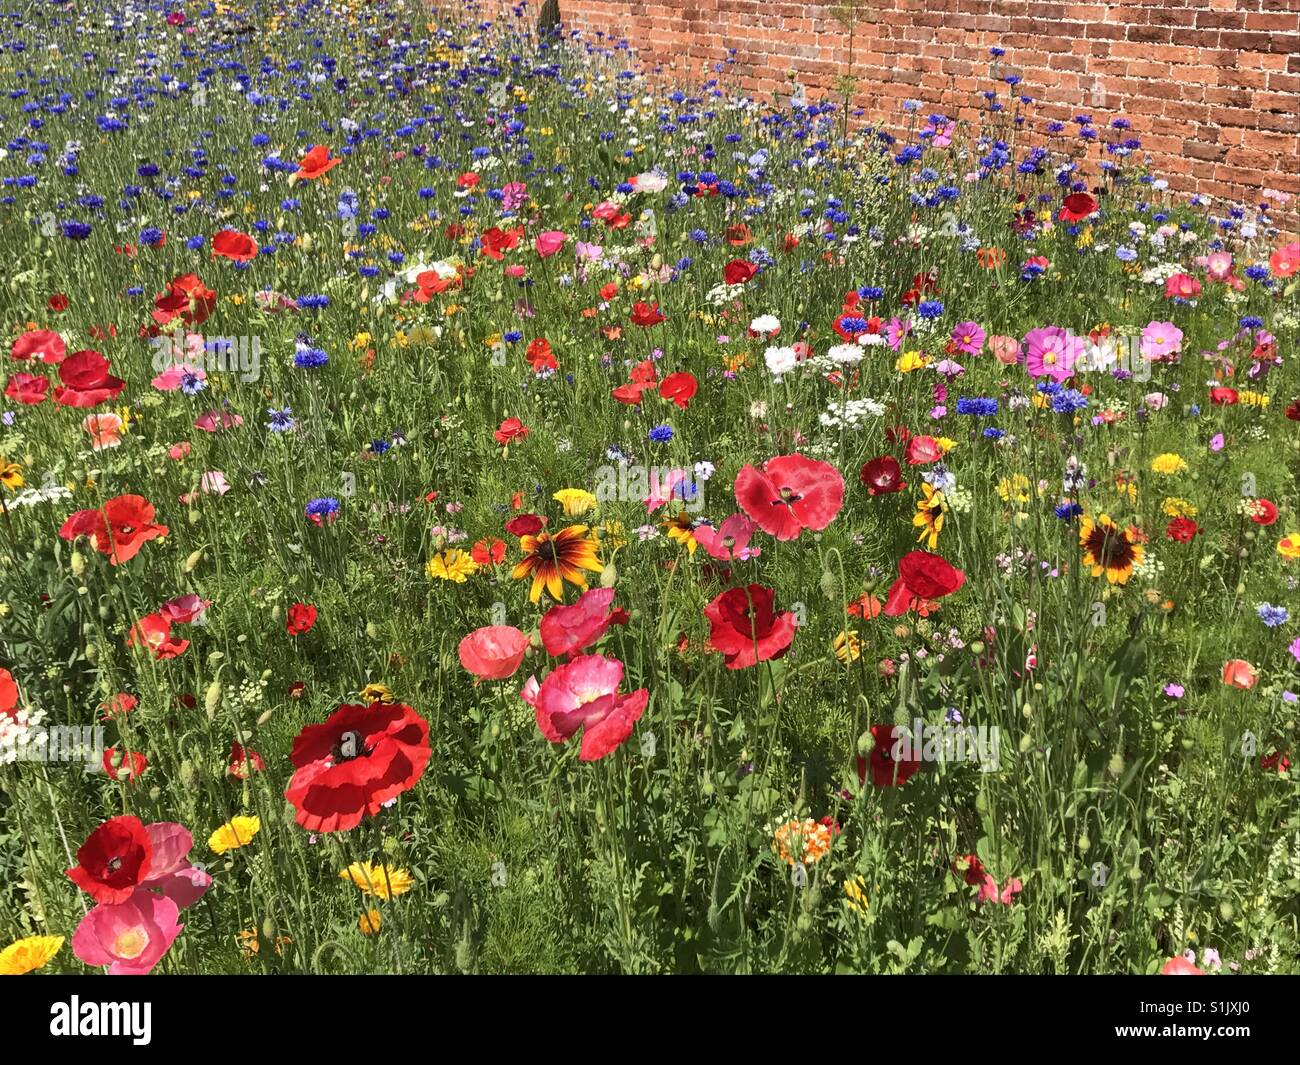 Colourful wild flower meadow and walled garden Stock Photo